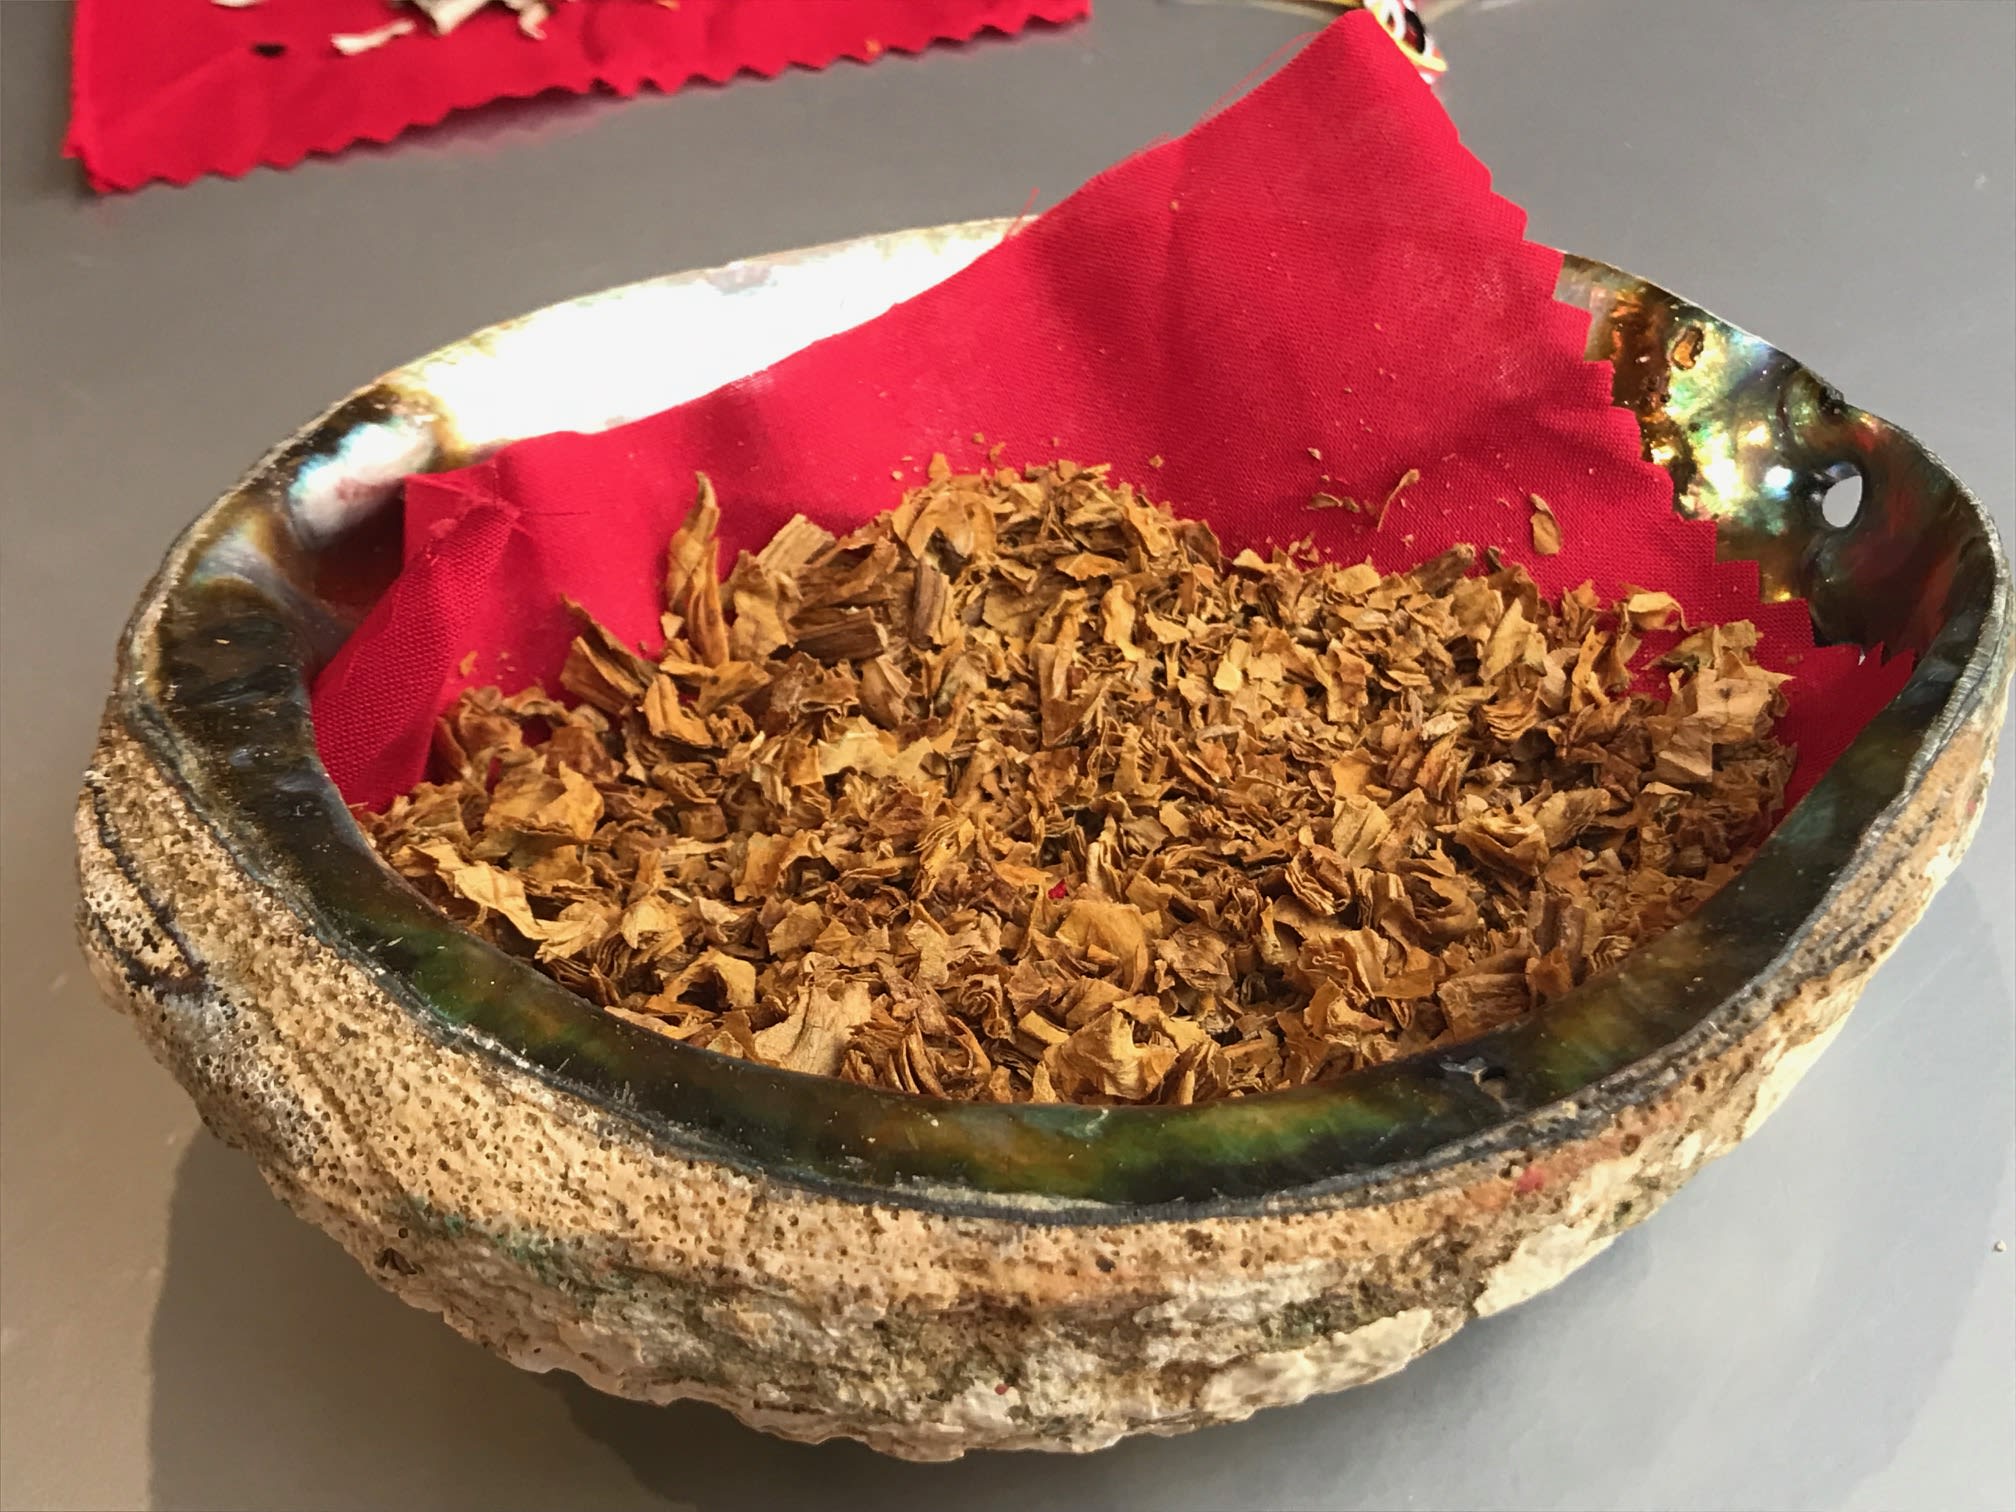 A bowl of tobacco rests on a table.